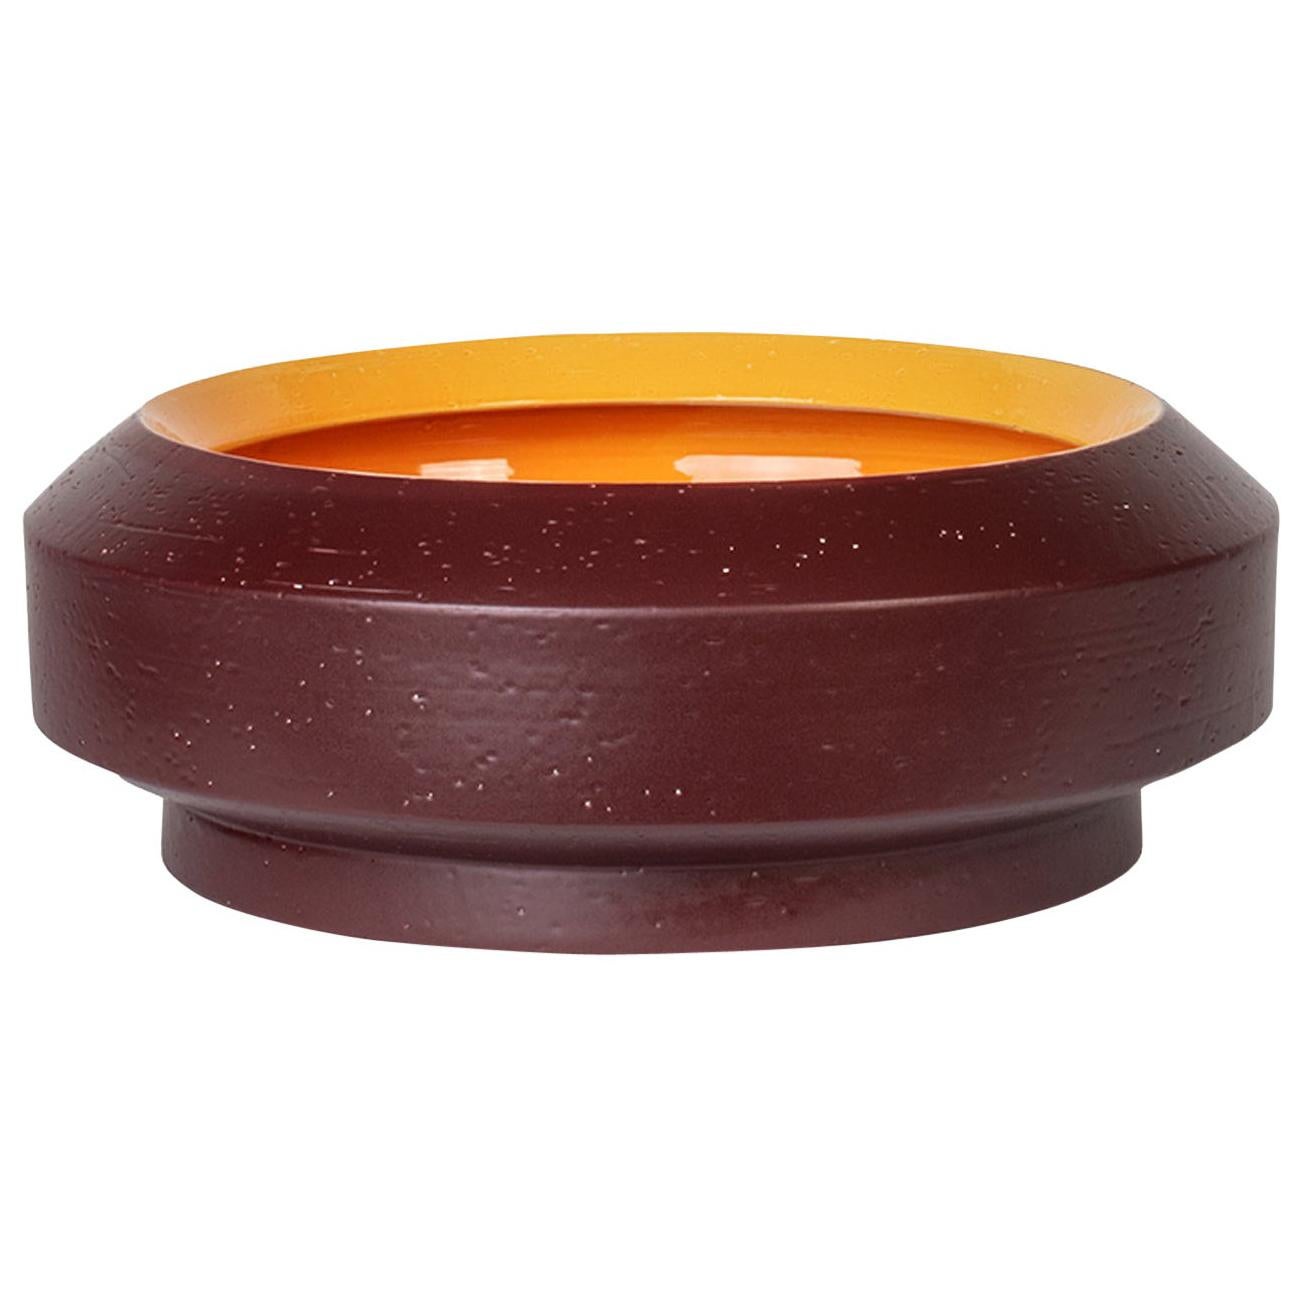 Elegant and expressive, this stylized ceramic bowl-shaped vase flaunts a two-tone finish enriching its design with earthy tones, warm brown on the outside and yellow inside, the latter visible through the wide top opening. Perfect in a modern,